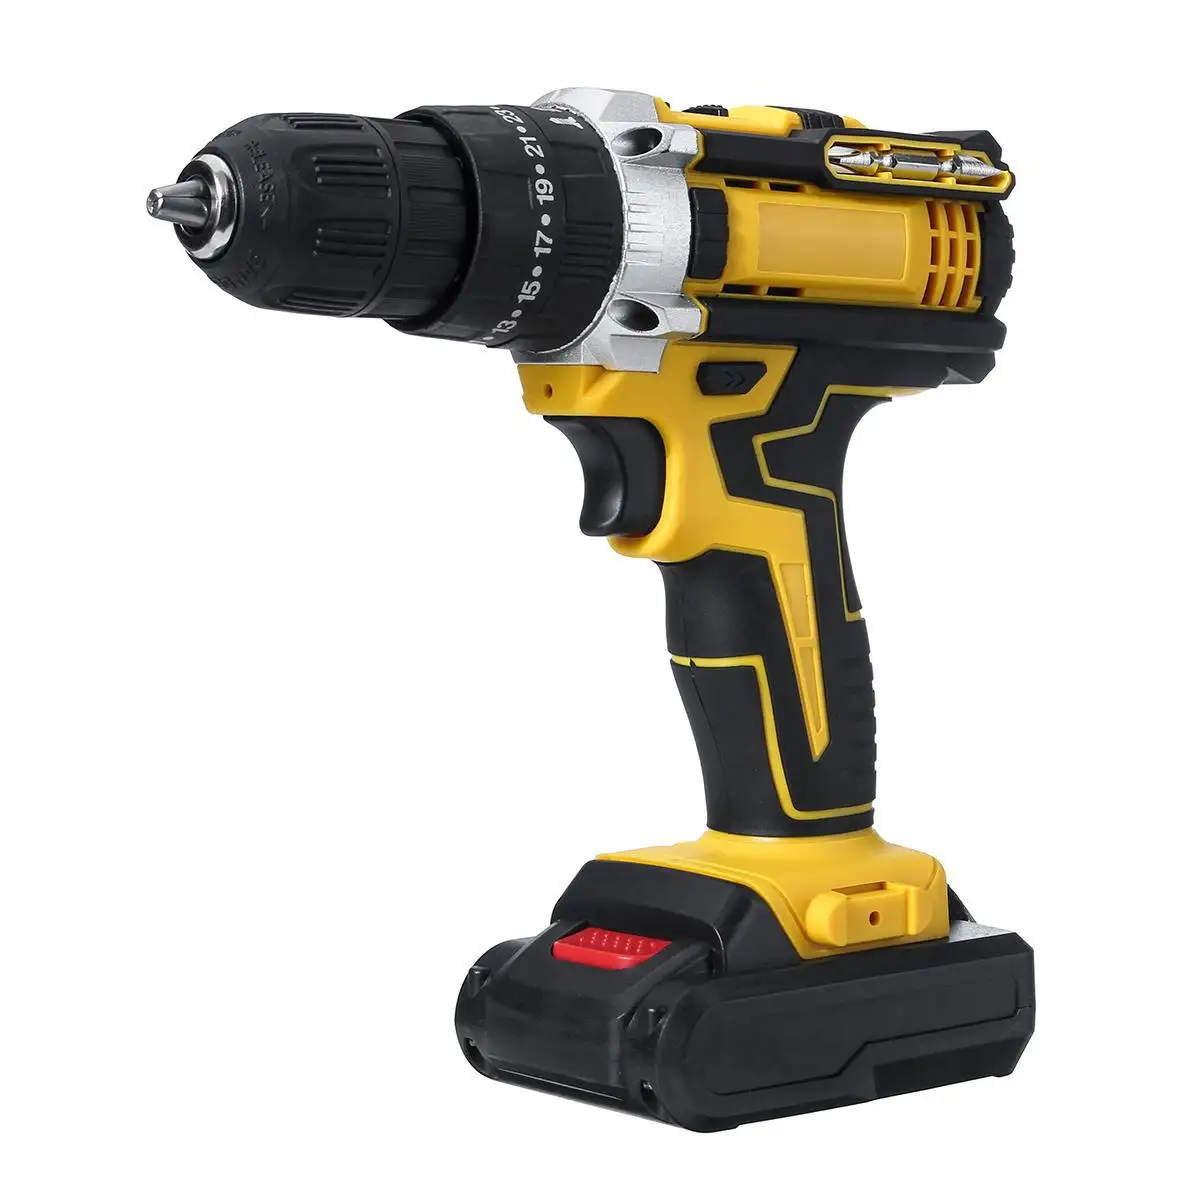 36V Li-ion Cordless Impact Drill Power Screw treiber Two Speed 3 in 1 Electric Hand Drill Multi funktion Electric Screwdriver